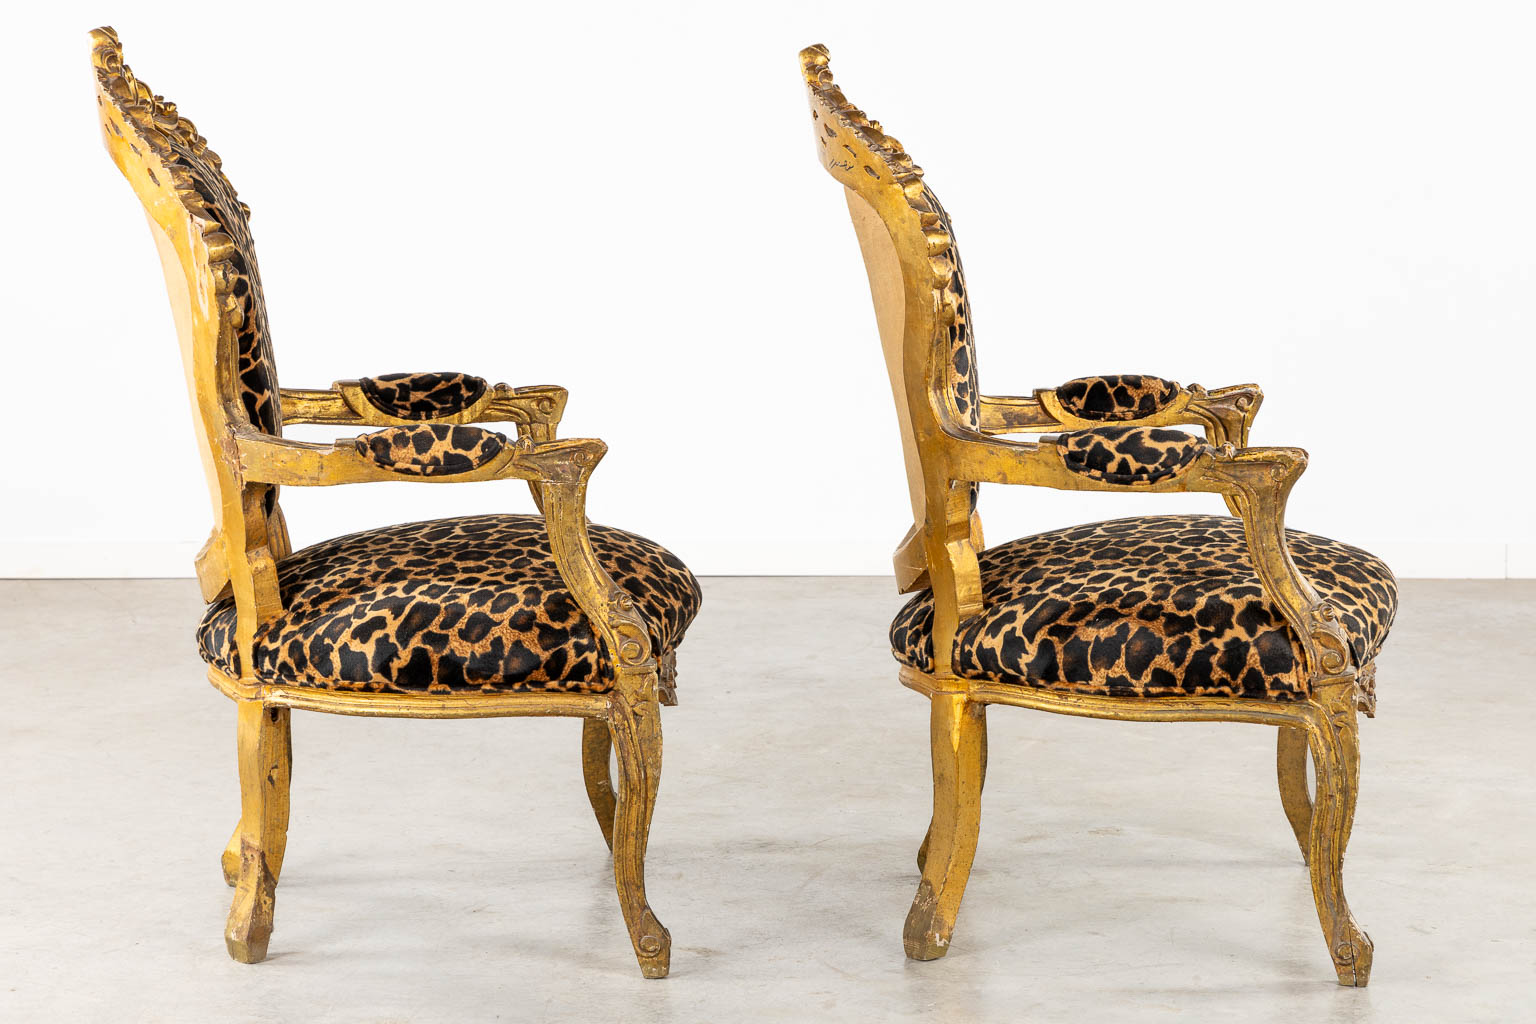 Two decorative armchairs, Louis XV style with a tiger print. (L:64 x W:67 x H:114 cm)